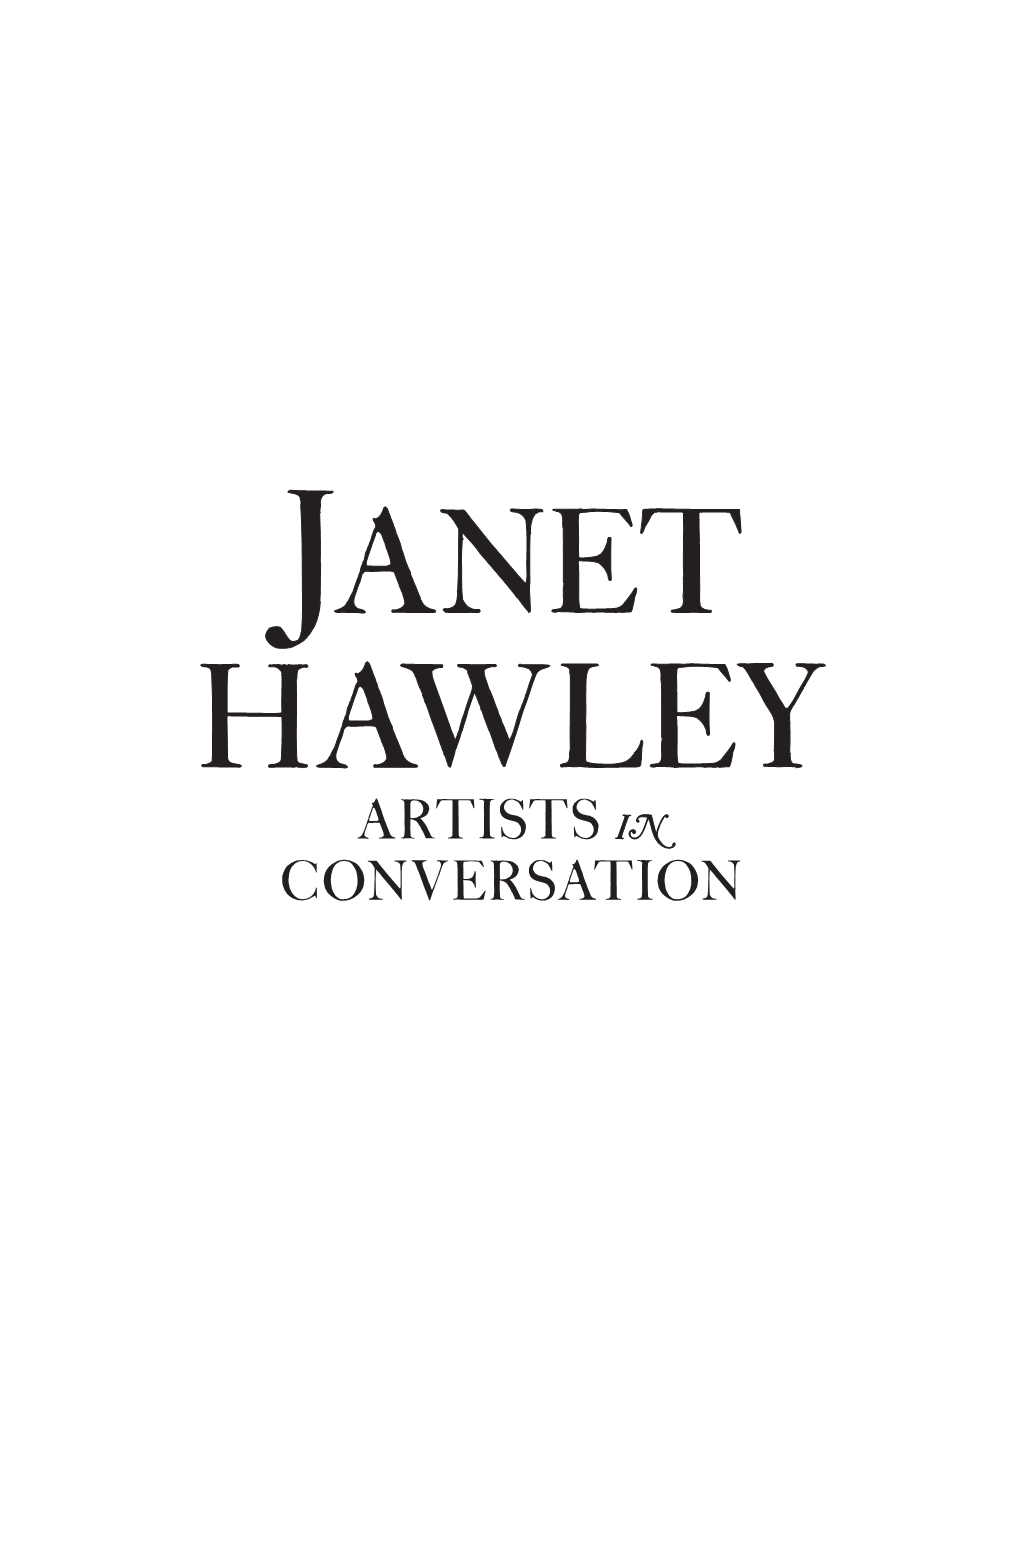 Janet Hawley 2012 Design Copyright © the Slattery Media Group Pty Ltd 2012 First Published by the Slattery Media Group Pty Ltd 2012 All Rights Reserved